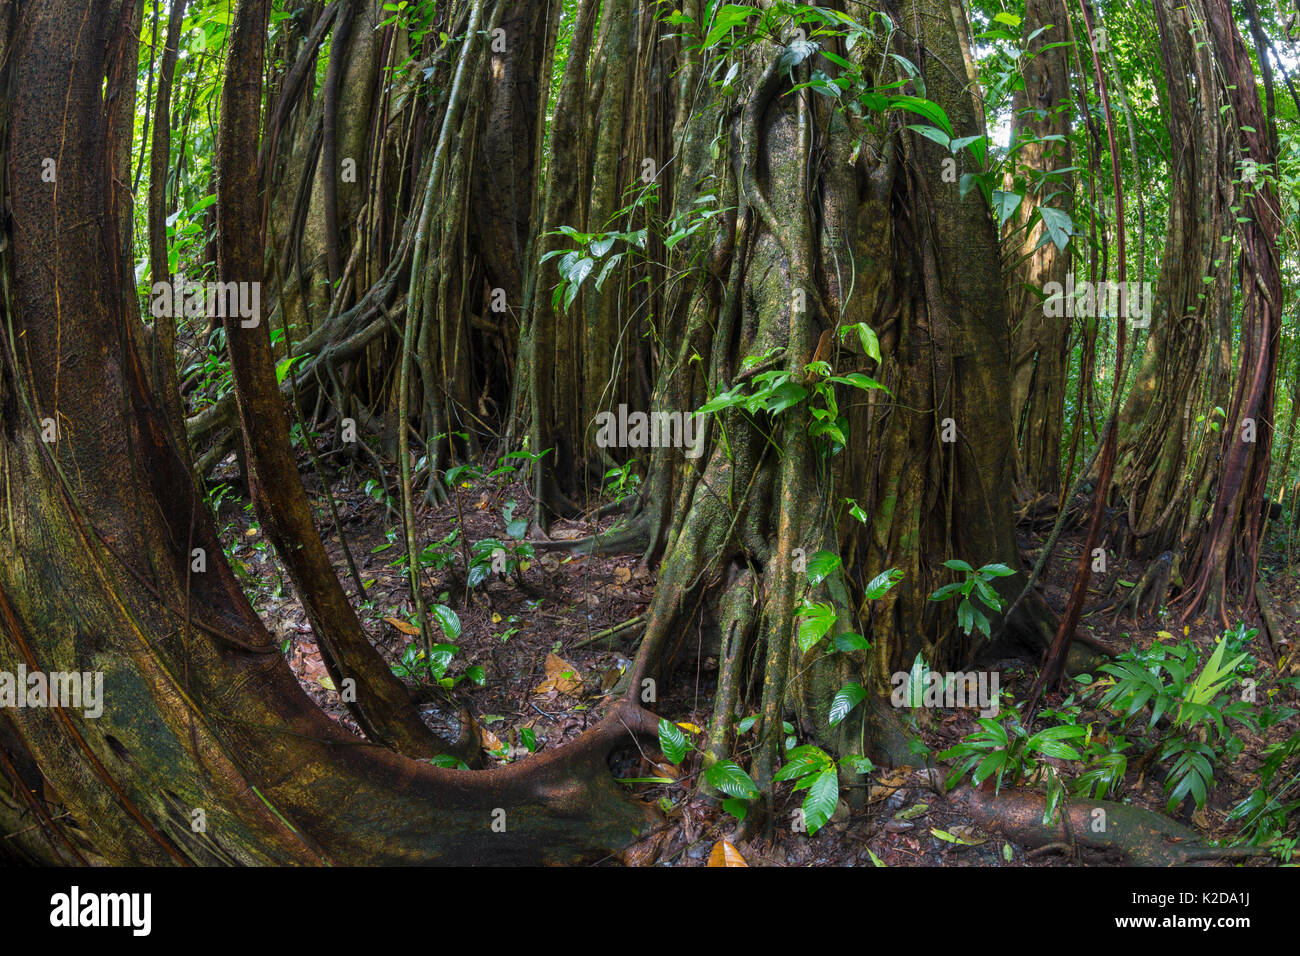 Strangler fig (Ficus zarazalensis) a species endemic to the Osa Peninsula, growing in lowland rainforest, Osa Peninsula, Costa Rica Stock Photo